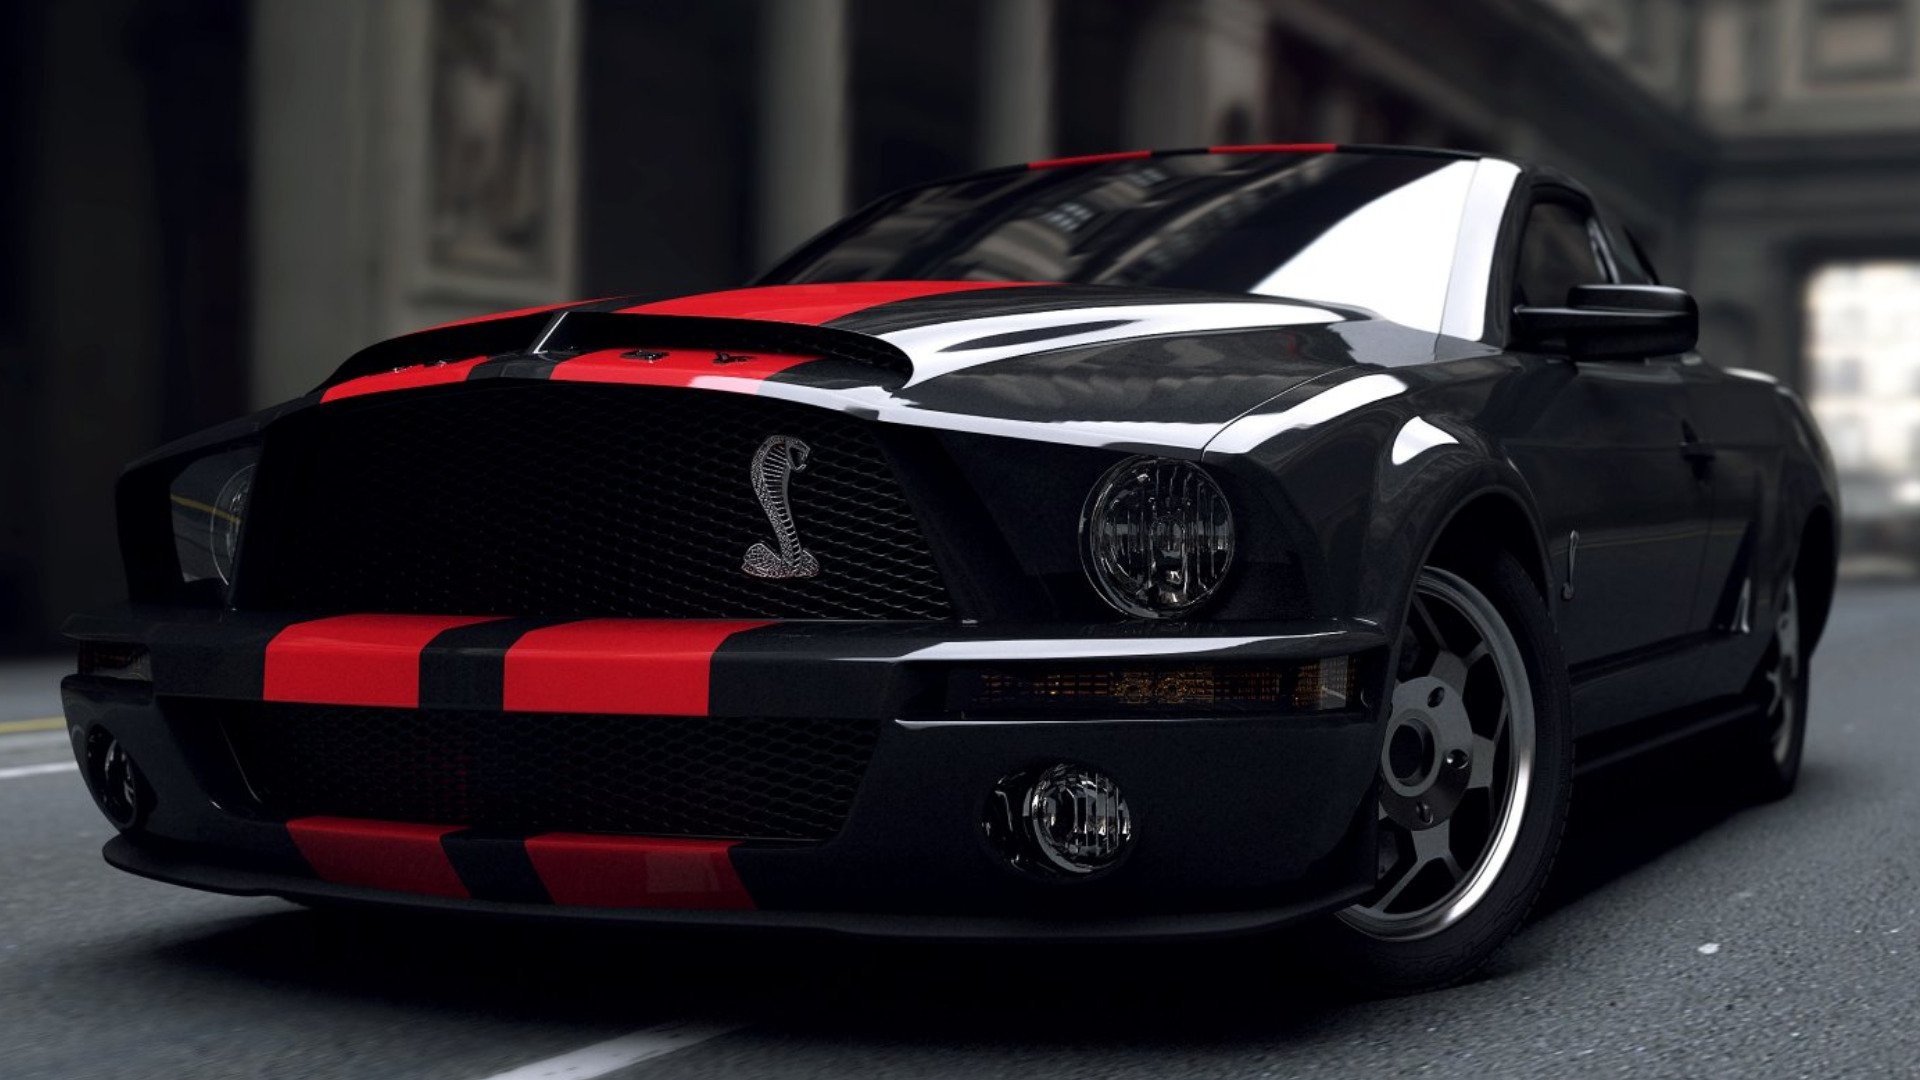 1920x1080 Vehicles - Ford Mustang Shelby GT500 Wallpaper